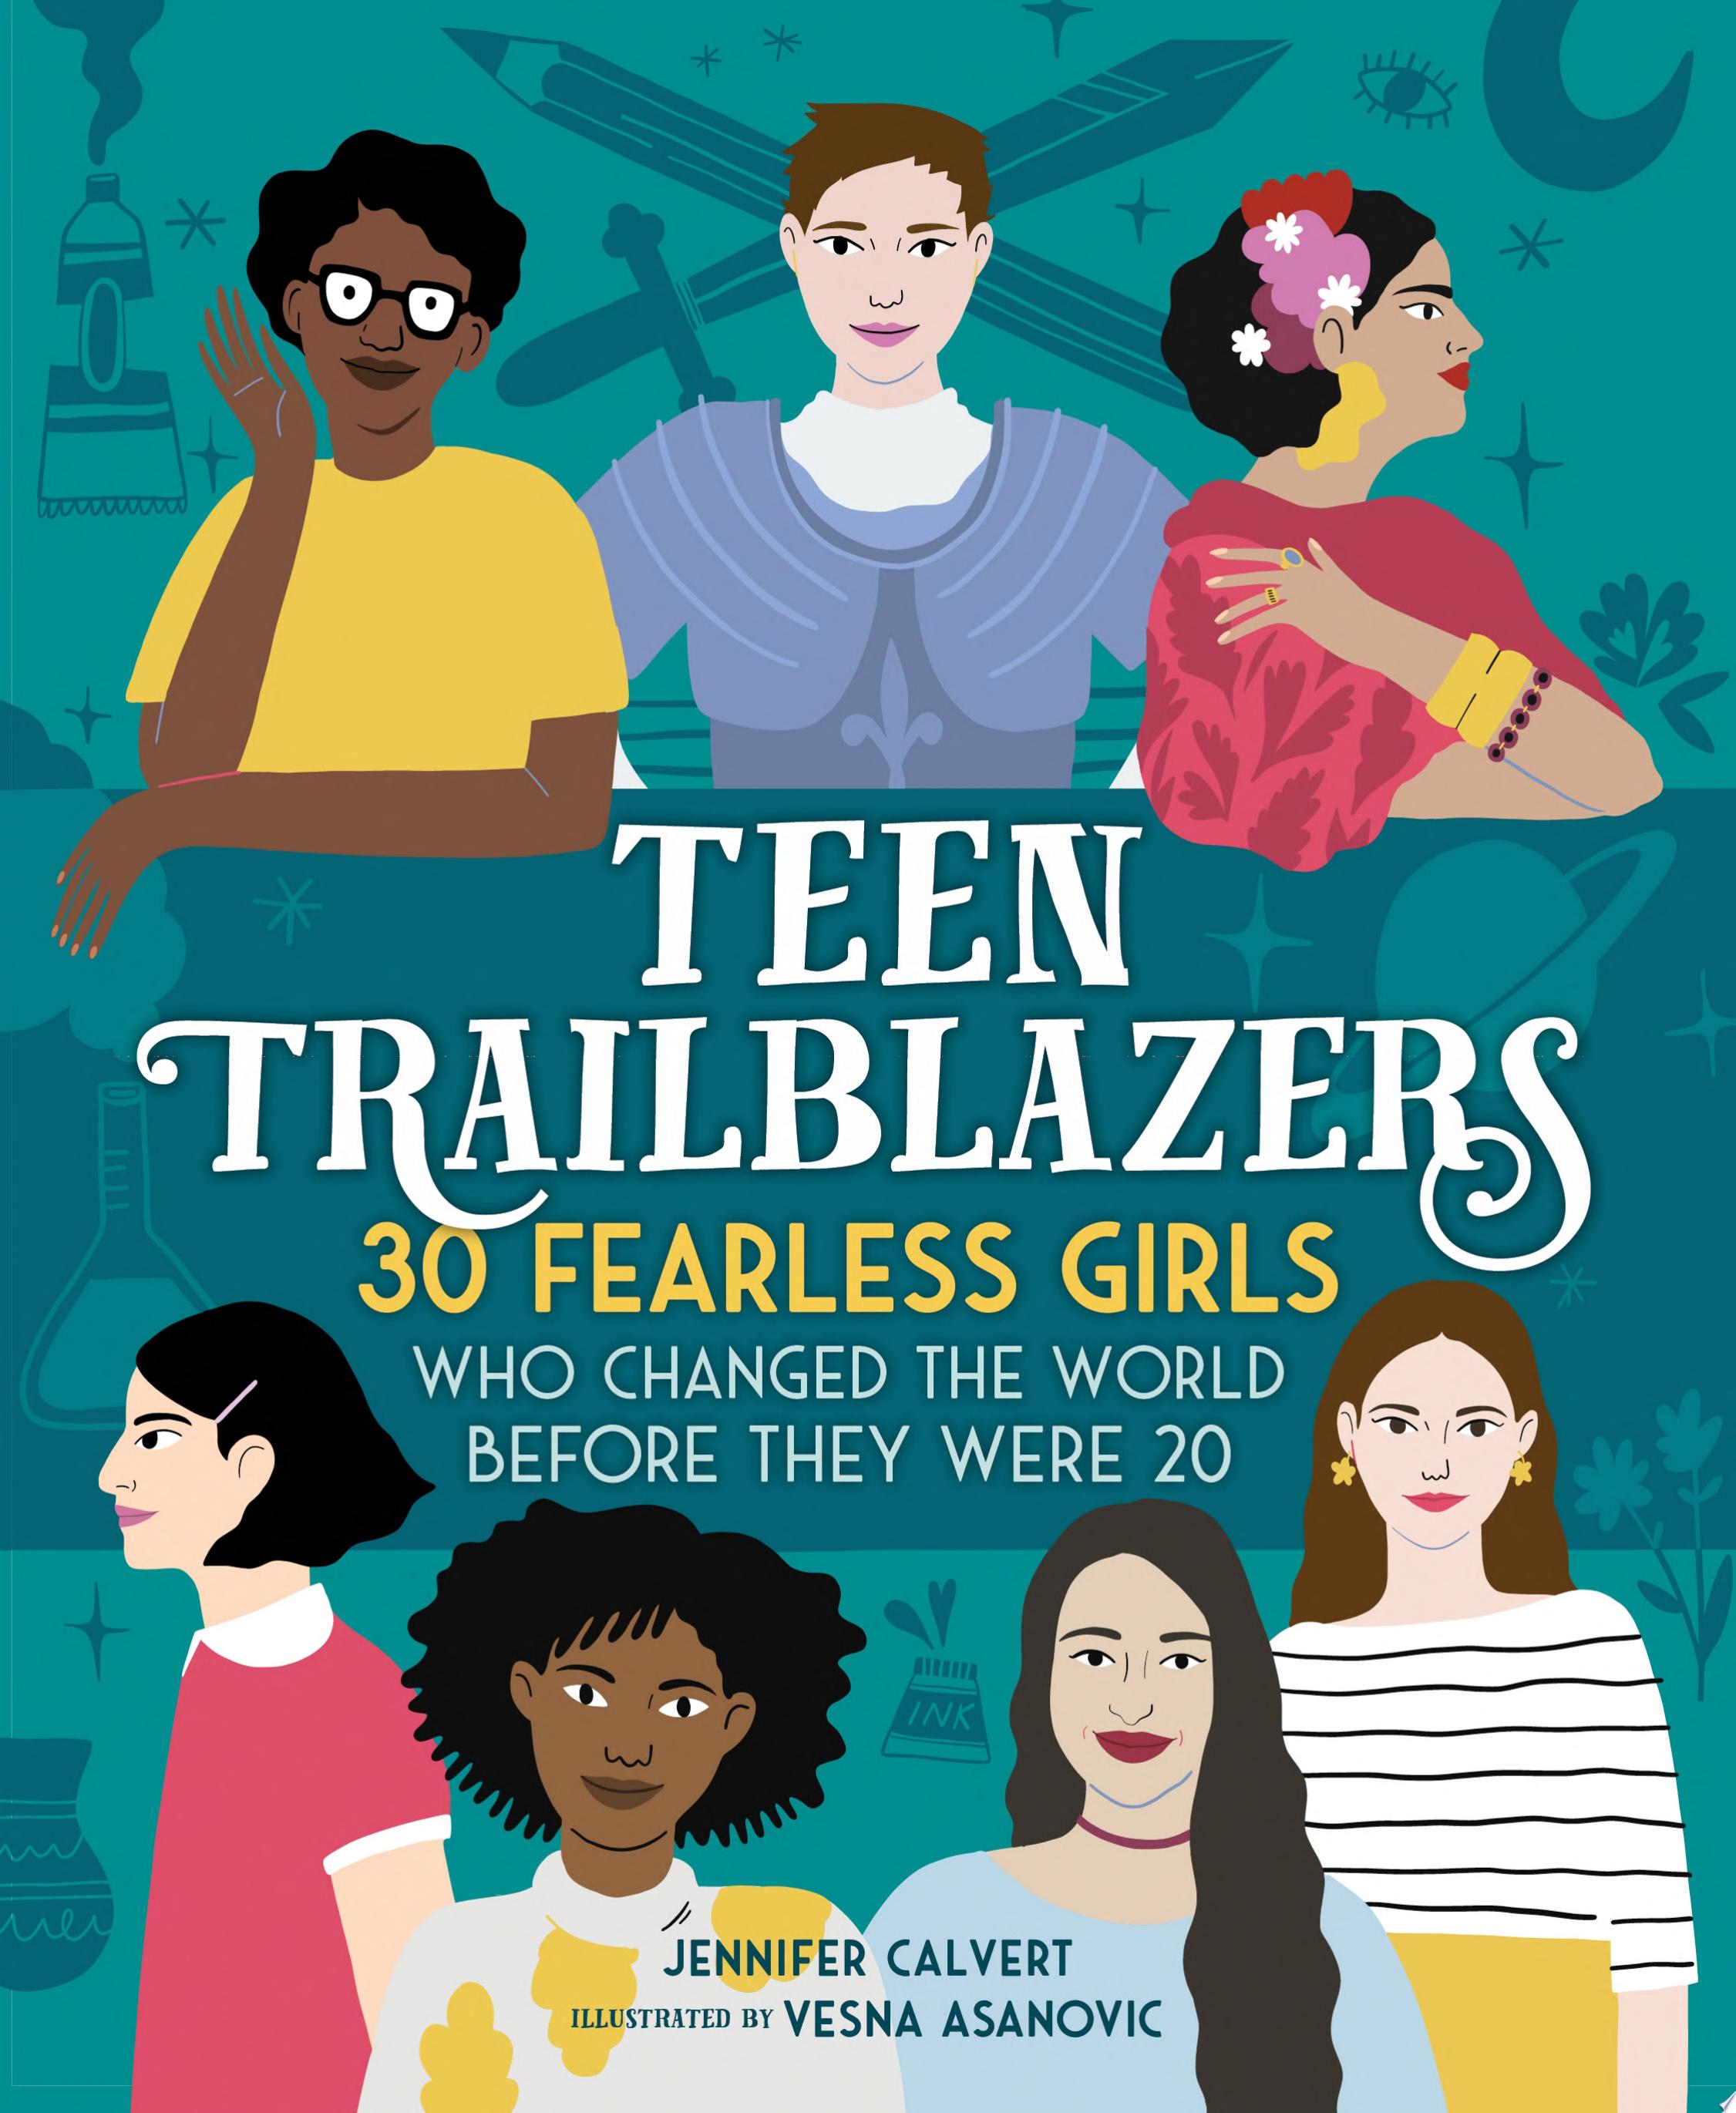 Image for "Teen Trailblazers: 30 Fearless Girls Who Changed the World Before They Were 20"